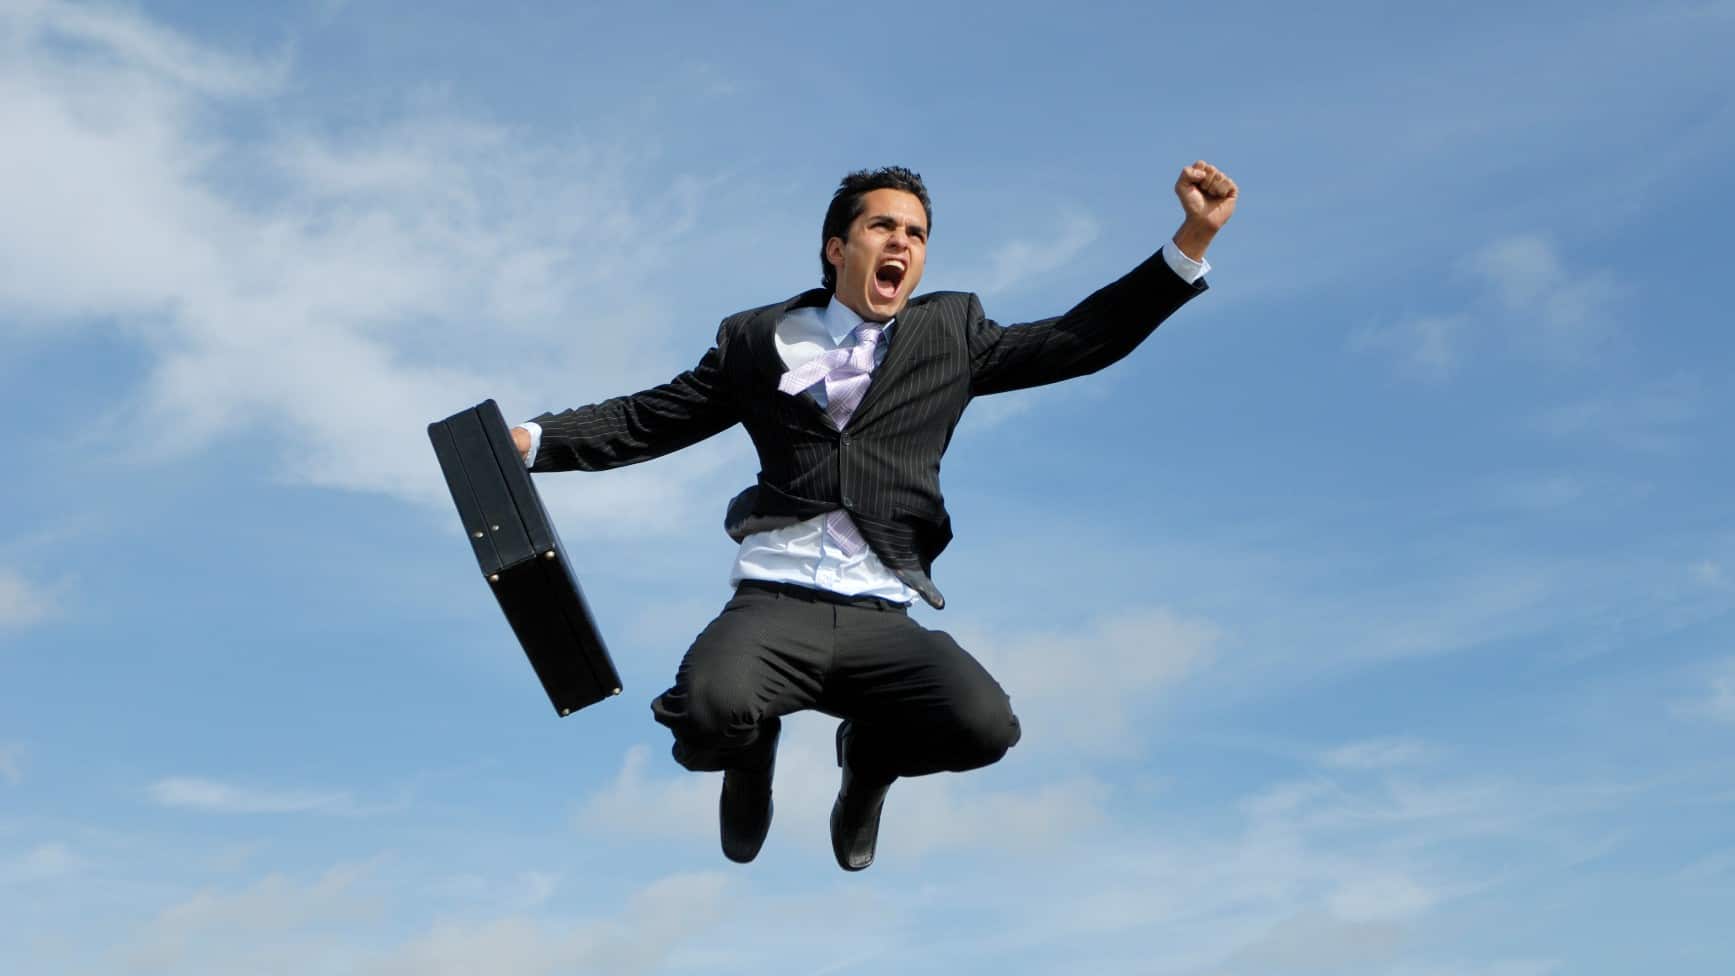 Businessman in suit and holding a briefcase jumps into the sky celebrating the rising Enero share price